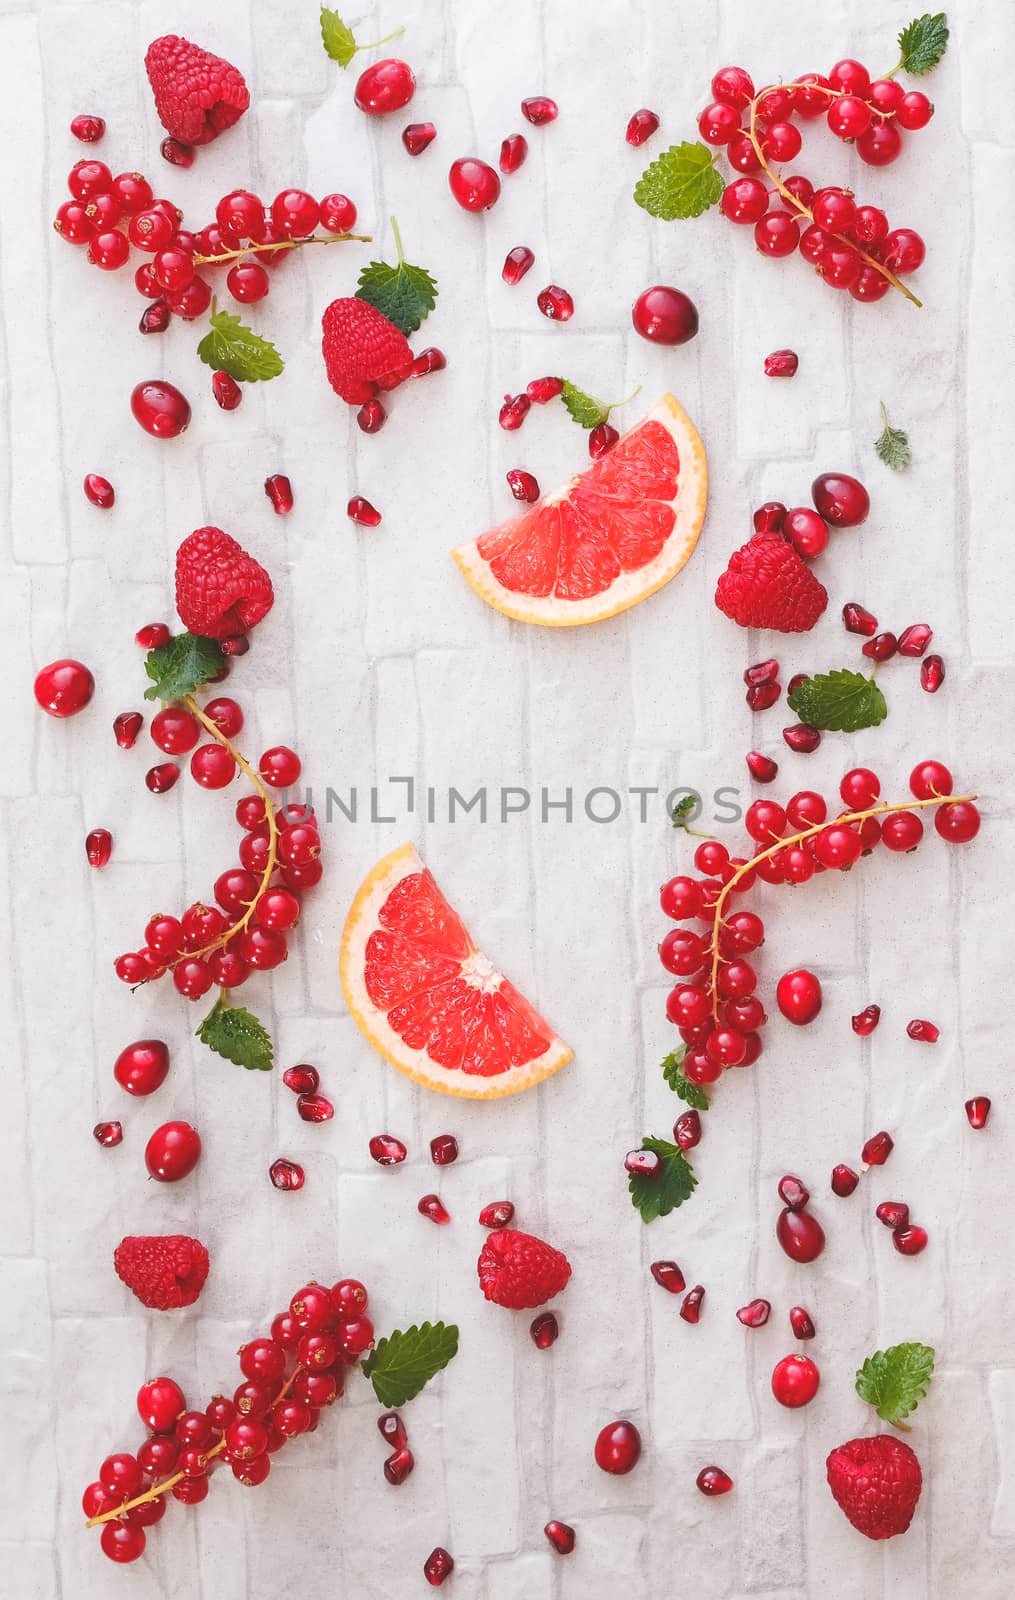 Collection of fresh whole and sliced red fruits on white rustic background. Still life pattern background. Overhead view